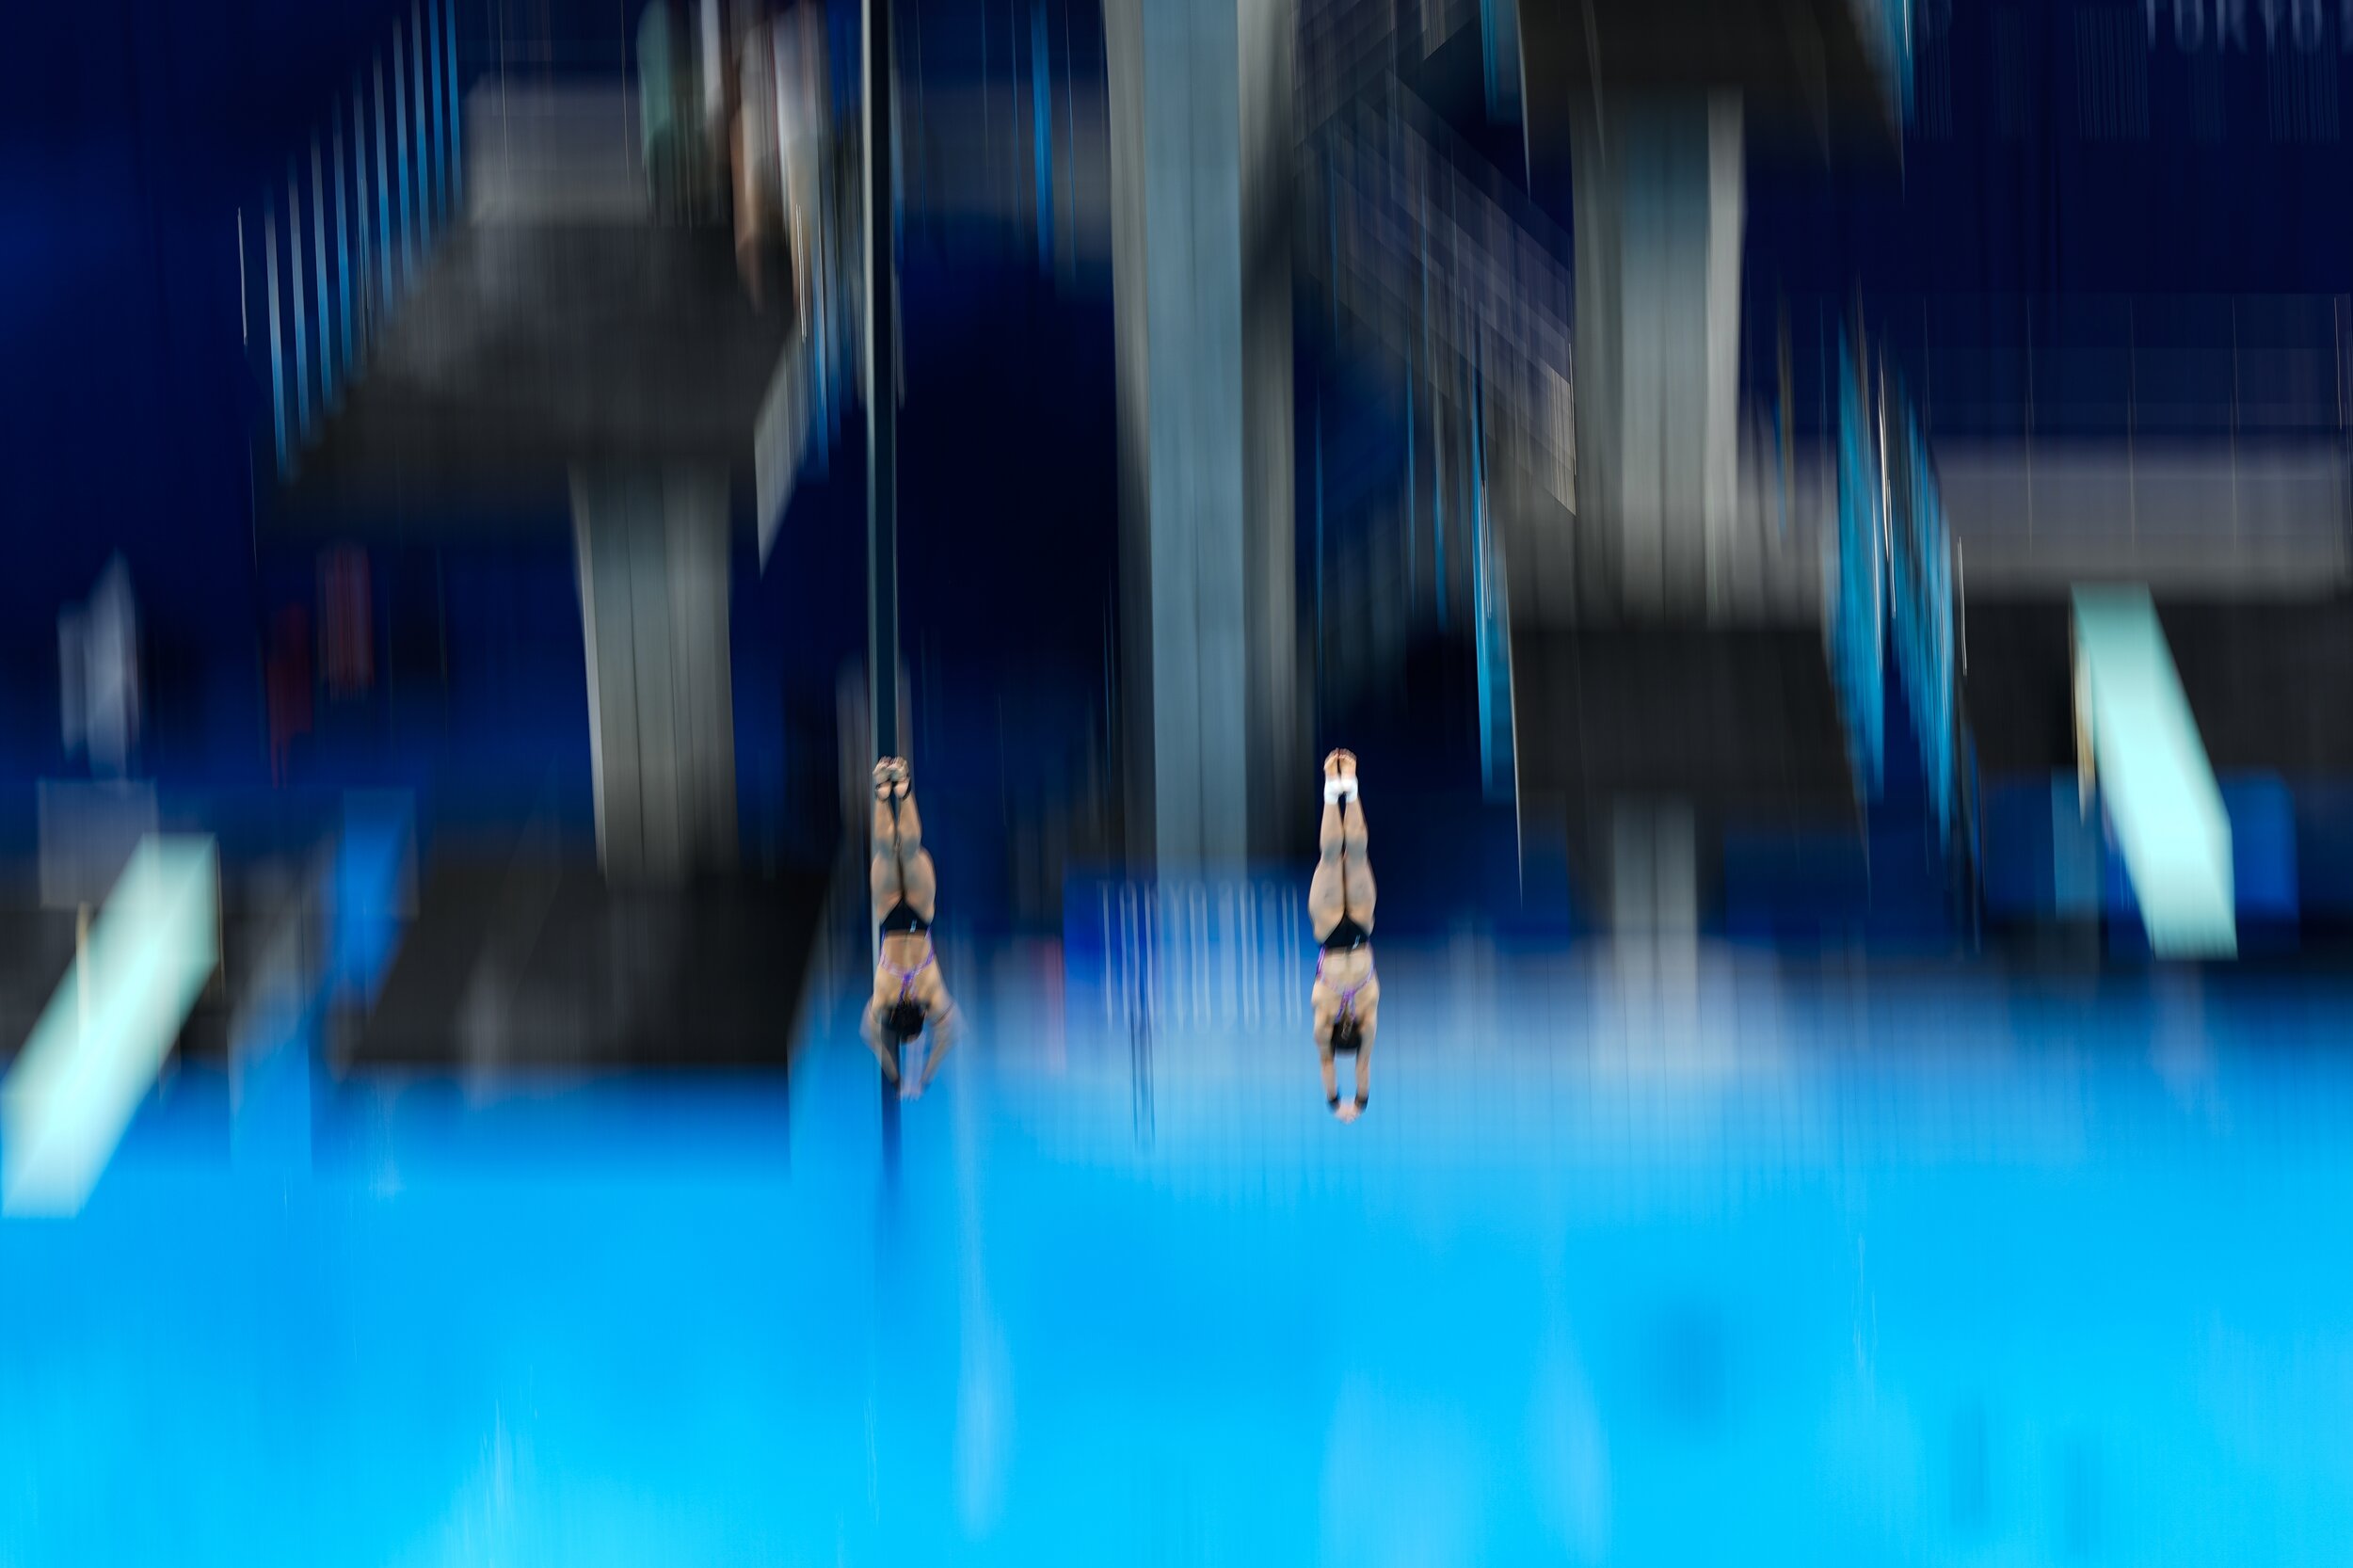  Mun Yen Leong and Pandelela of Malaysia compete during the women's synchronised 10-meter platform final at the 2020 Summer Olympics, Monday, July 26, 2021, in Tokyo, Japan. (AP Photo/Morry Gash) 